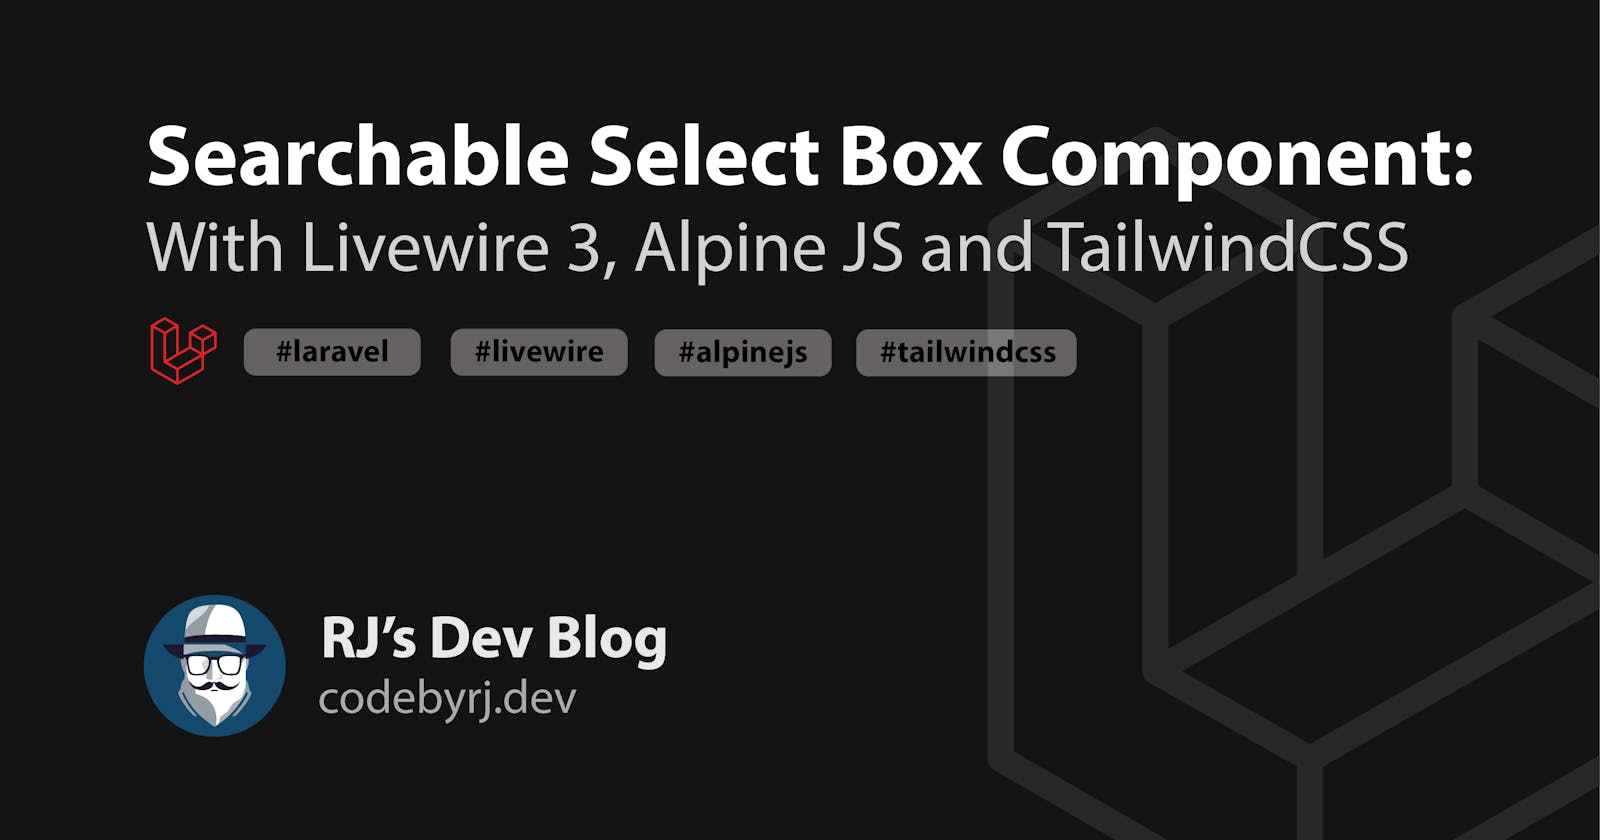 Creating a Searchable Select Box Component With Livewire 3, Alpine JS and TailwindCSS